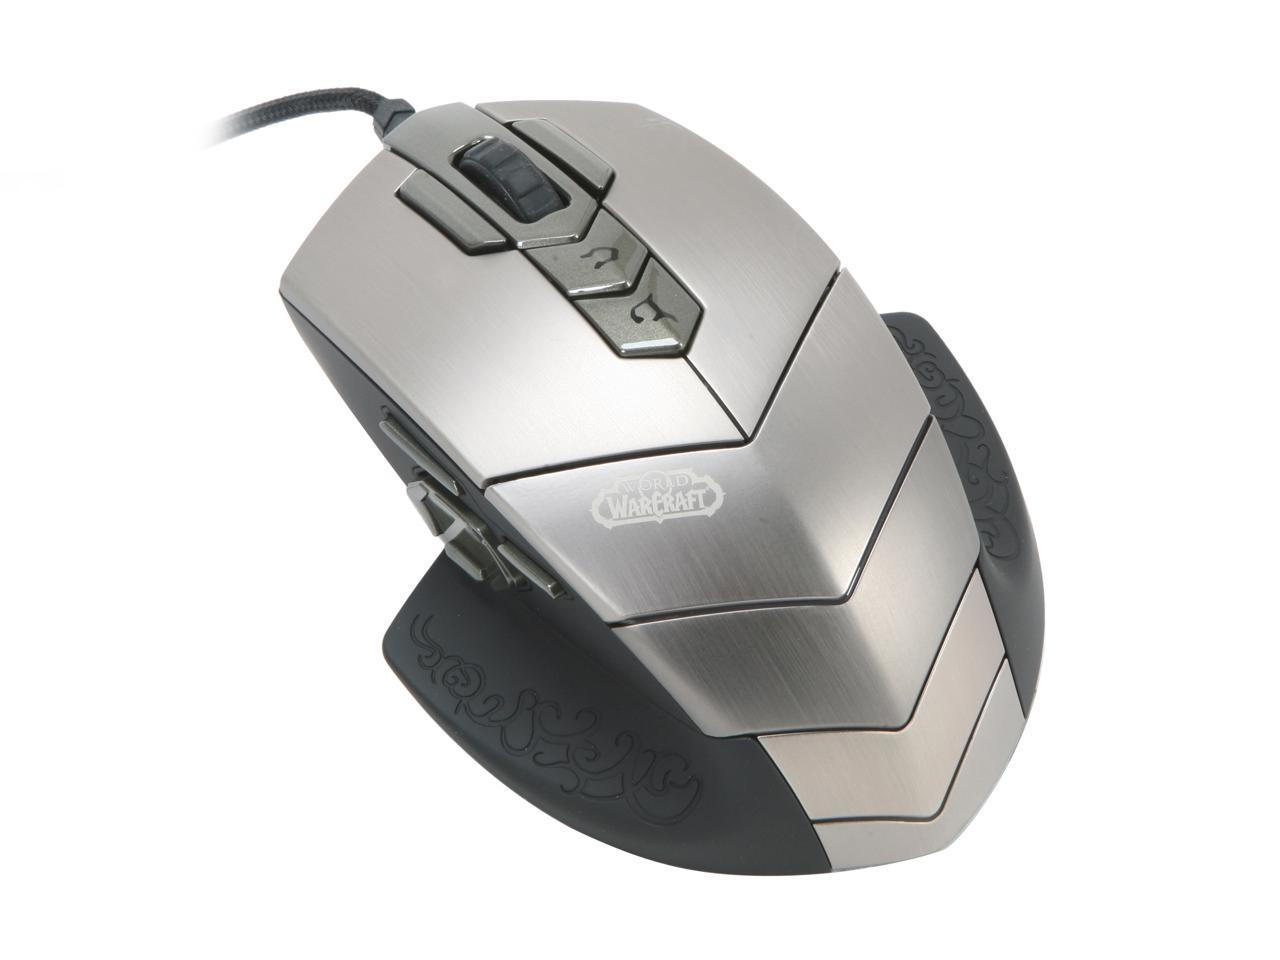 how to use steelseries wow mouse for other games